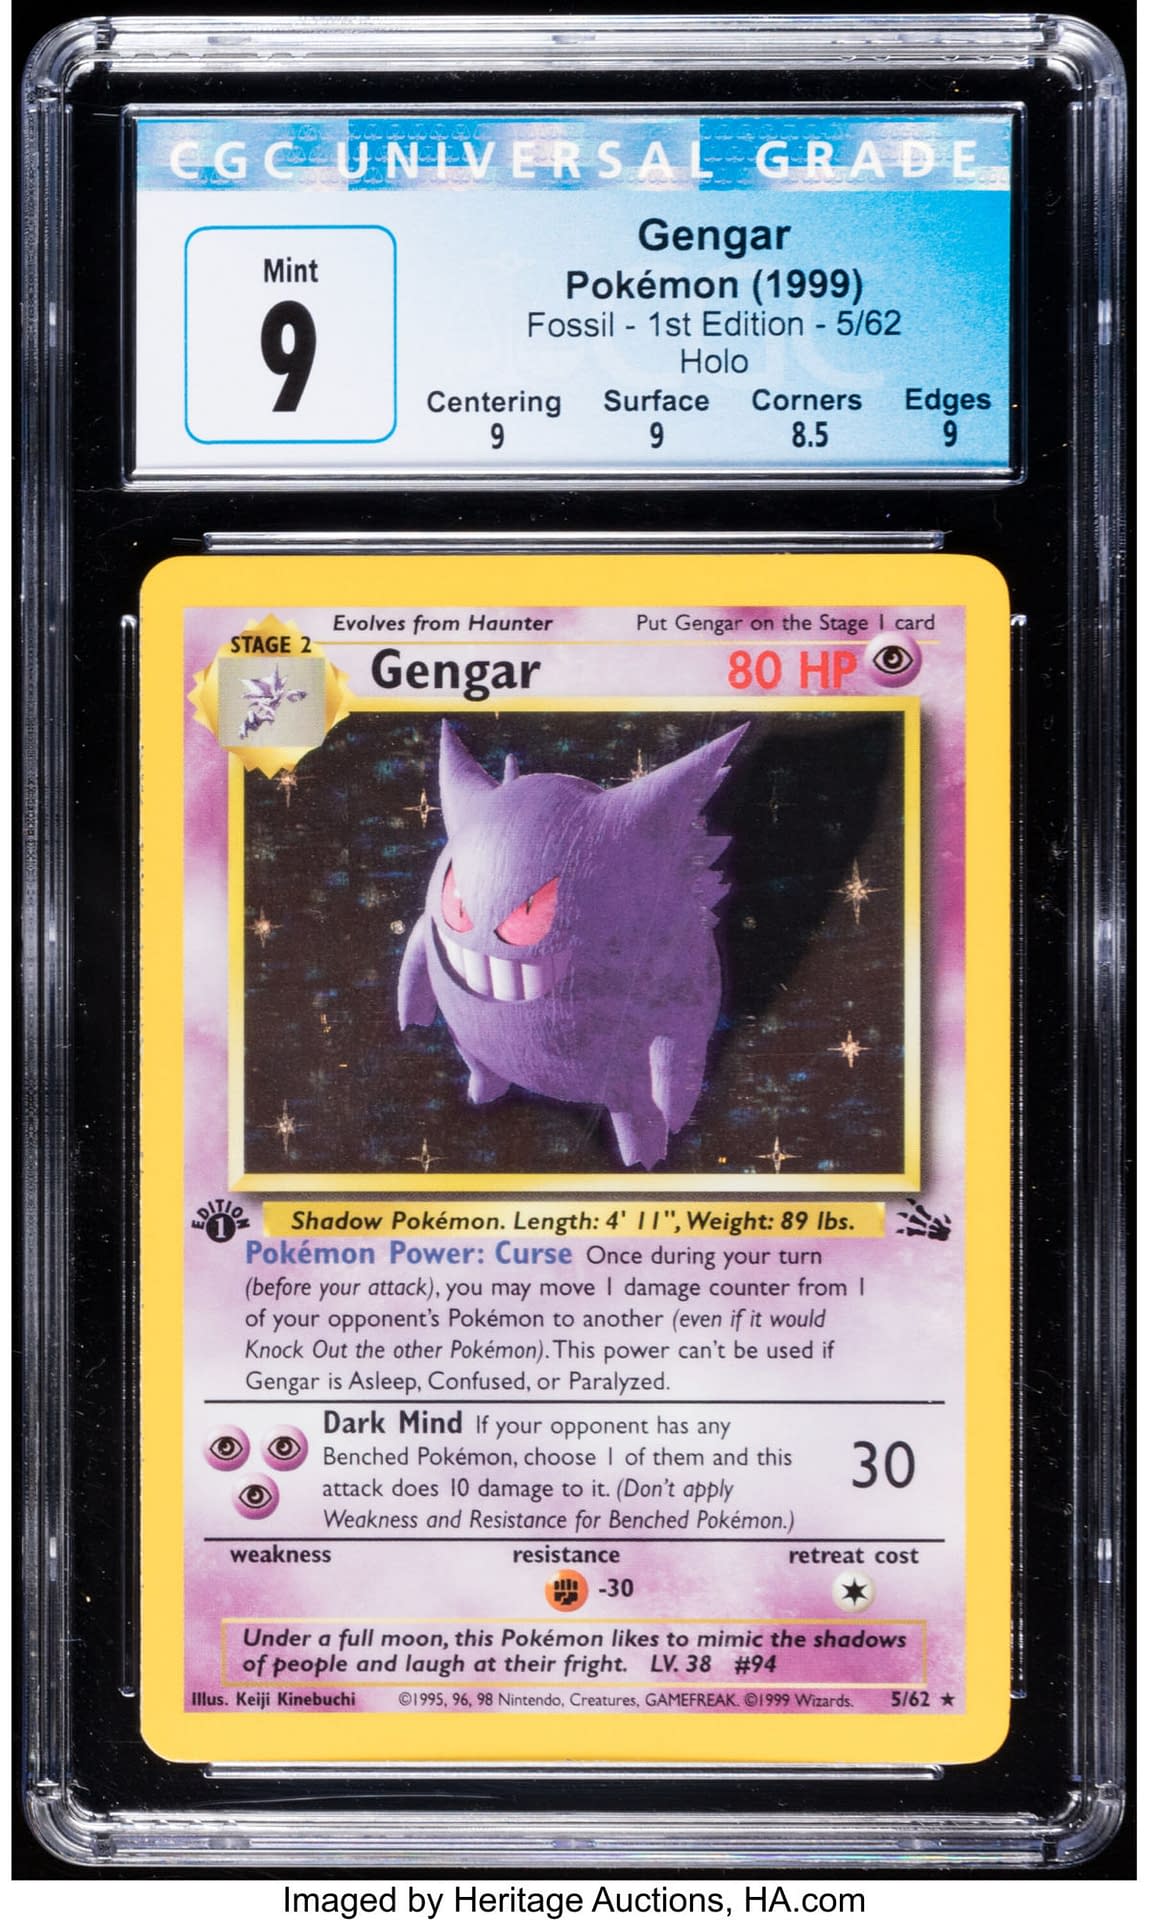 Pokémon TCG: 1st Edition Fossil Gengar Up For Auction At Heritage